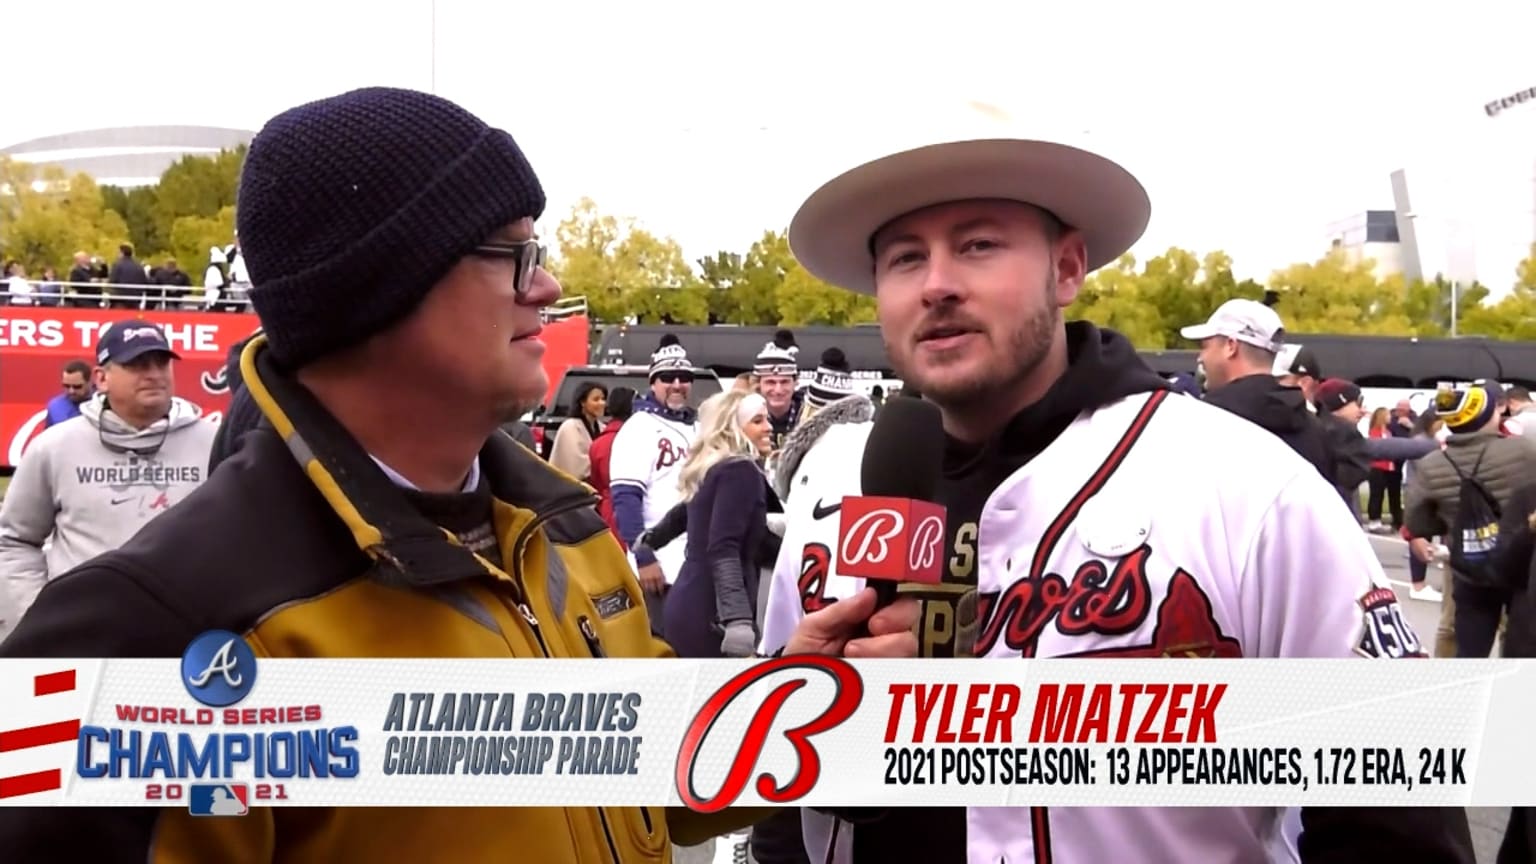 Video: Security guard at Braves parade got rough with pitcher Tyler Matzek